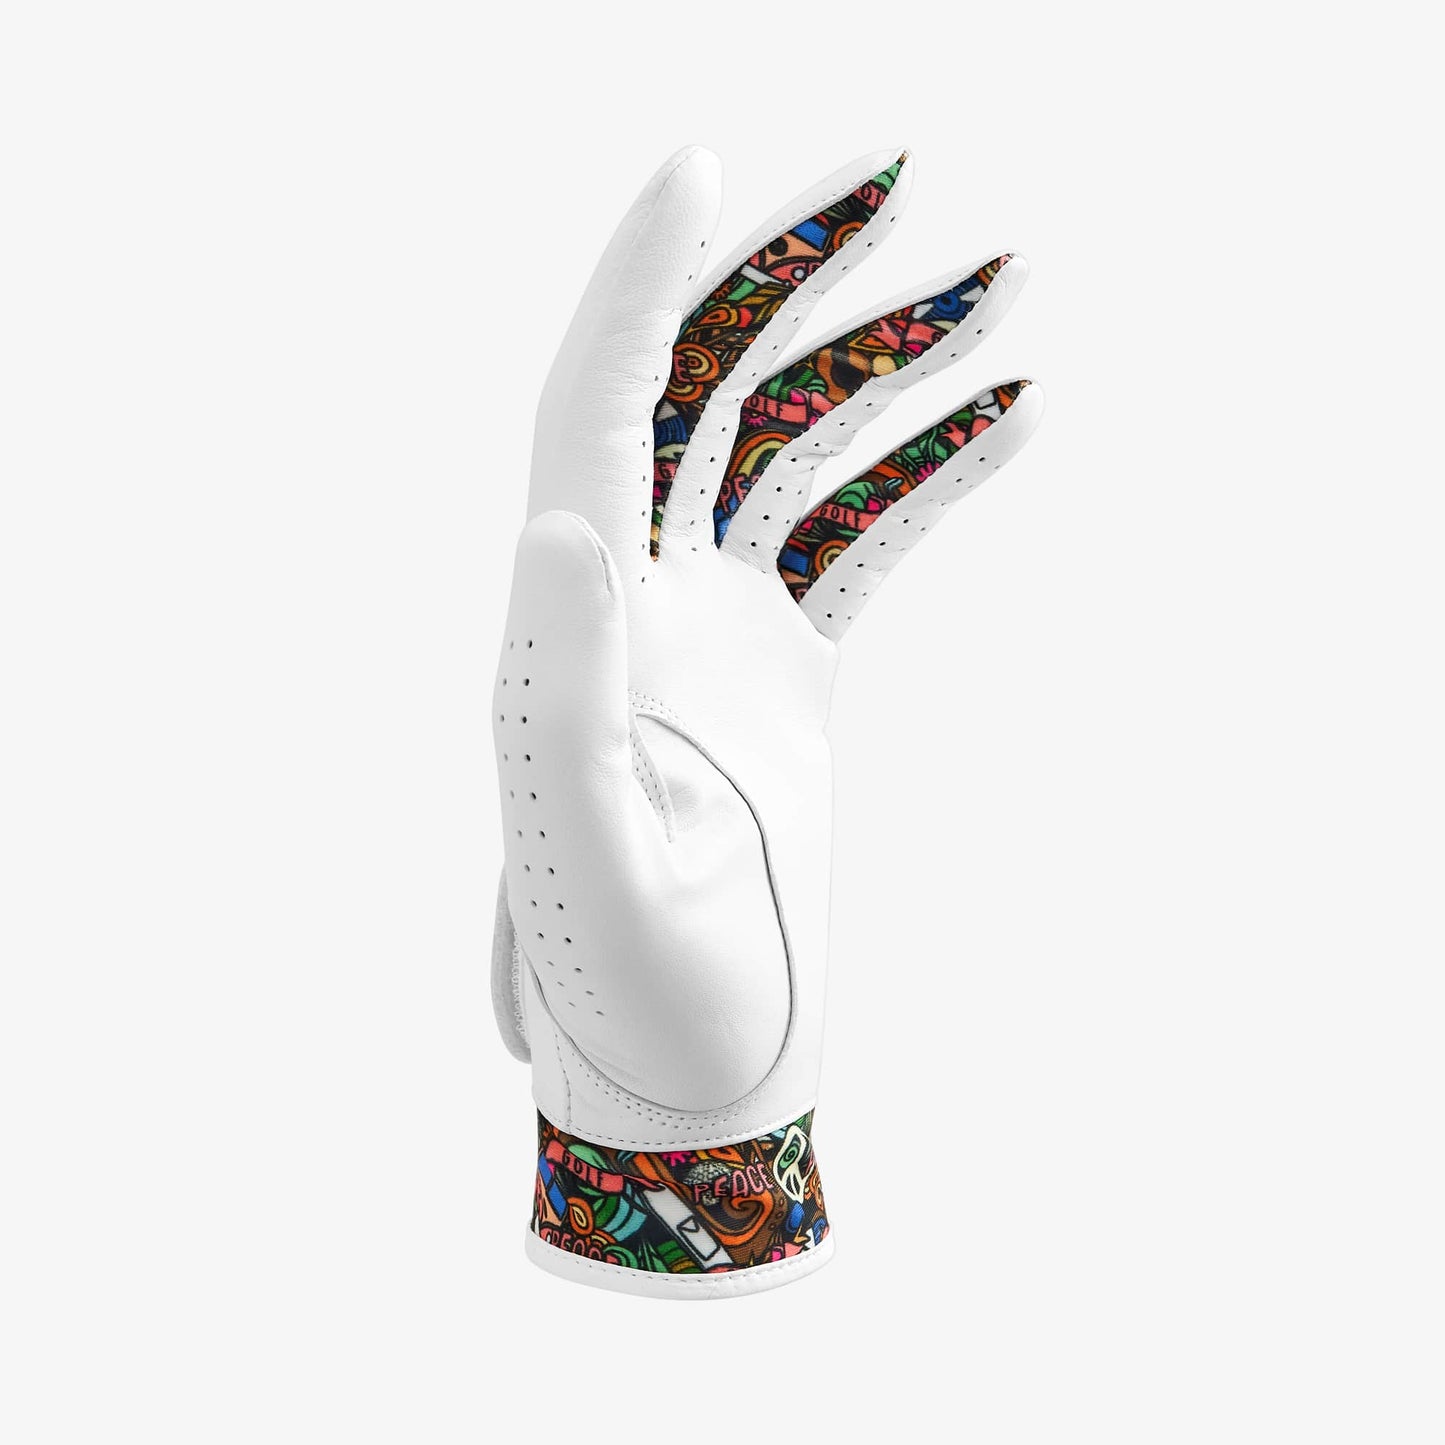 Cool golf glove with design in between fingers